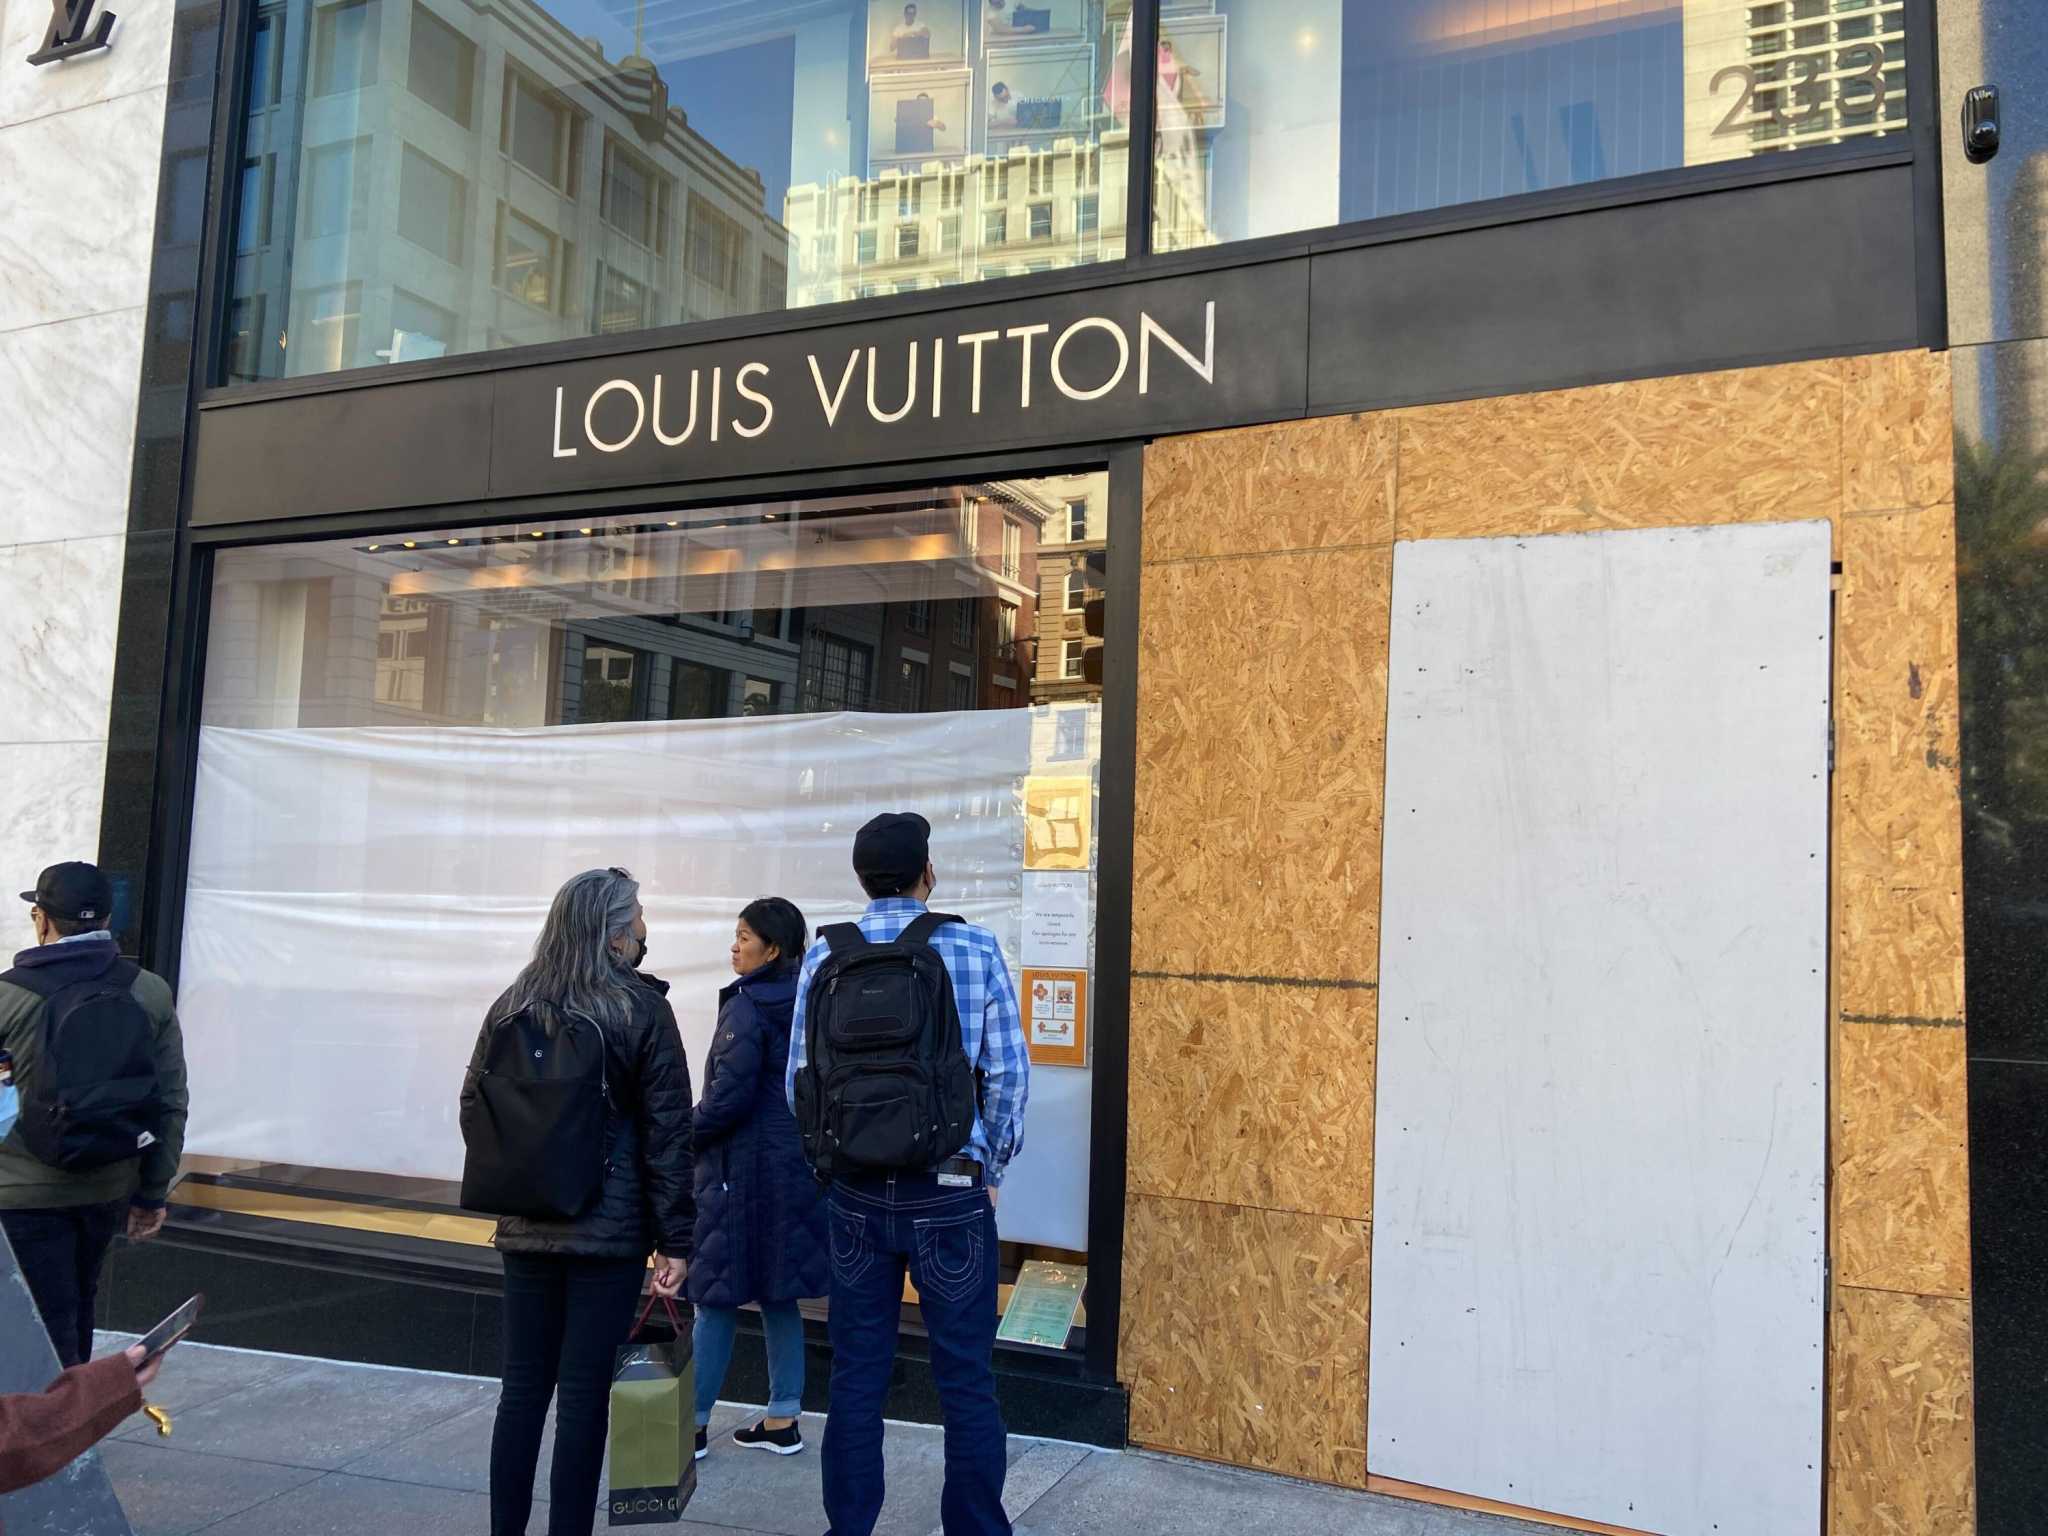 Changes coming to San Francisco's Union Square after Louis Vuitton retail  theft